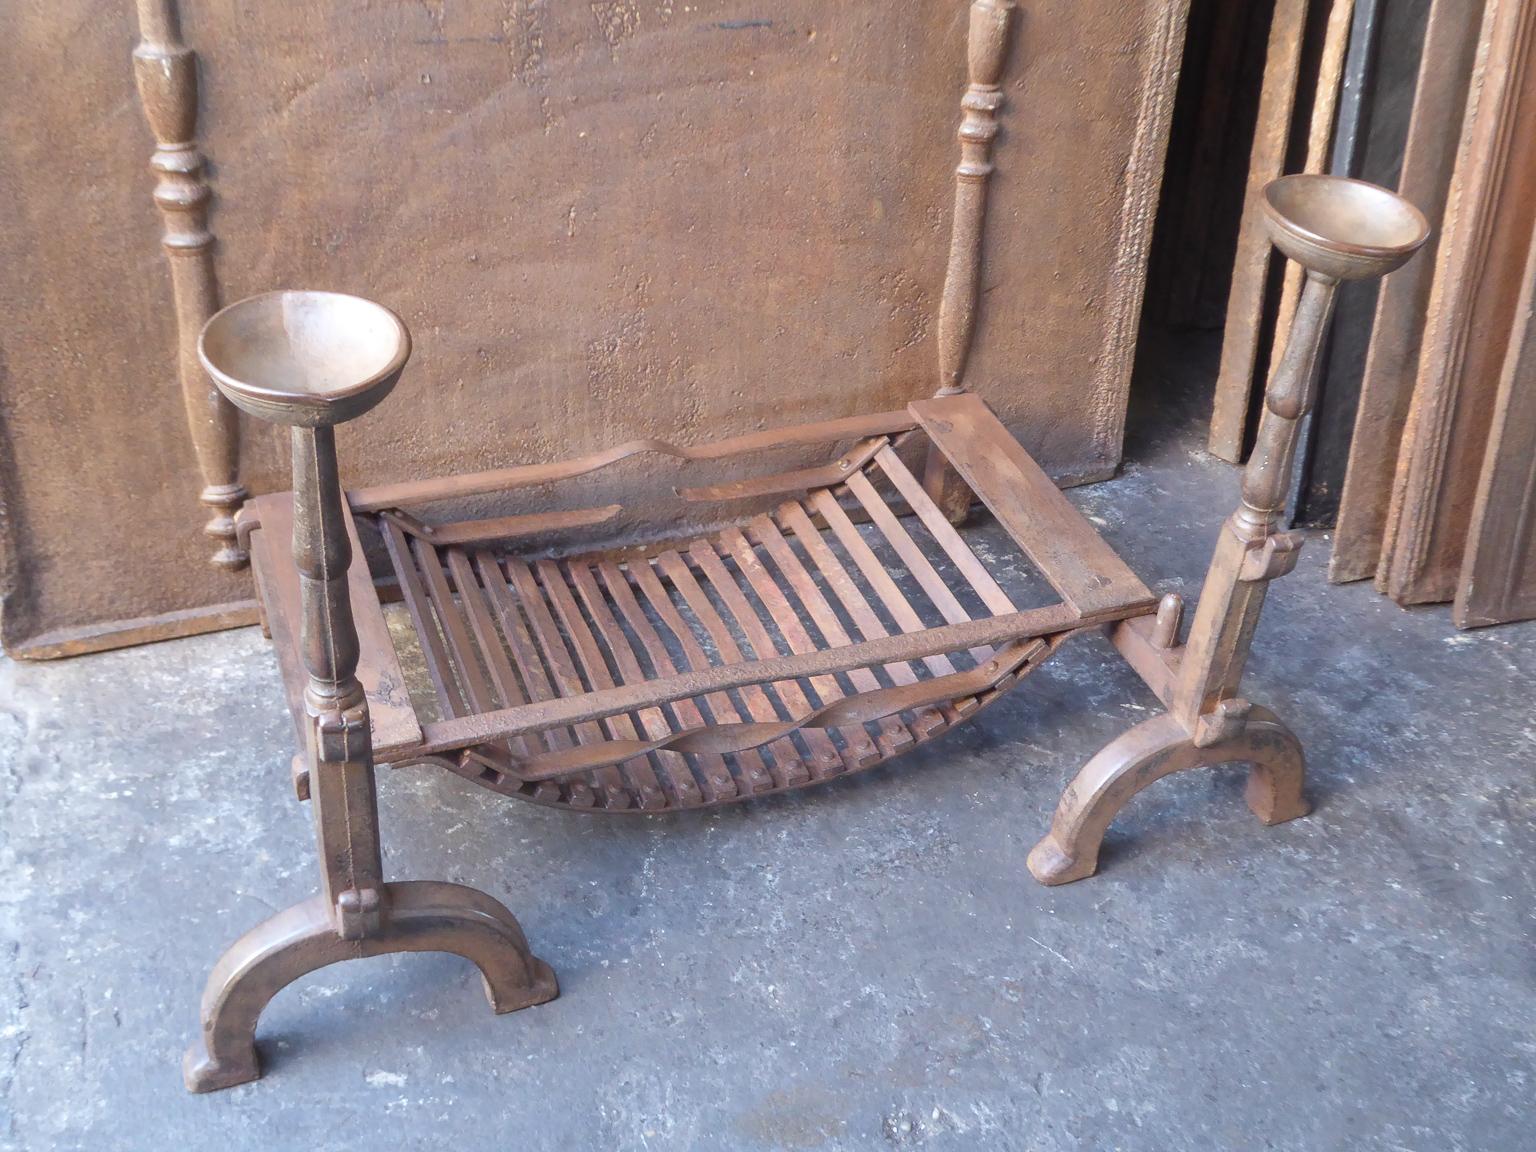 British 19th Century English Victorian Fireplace Grate or Fire Grate